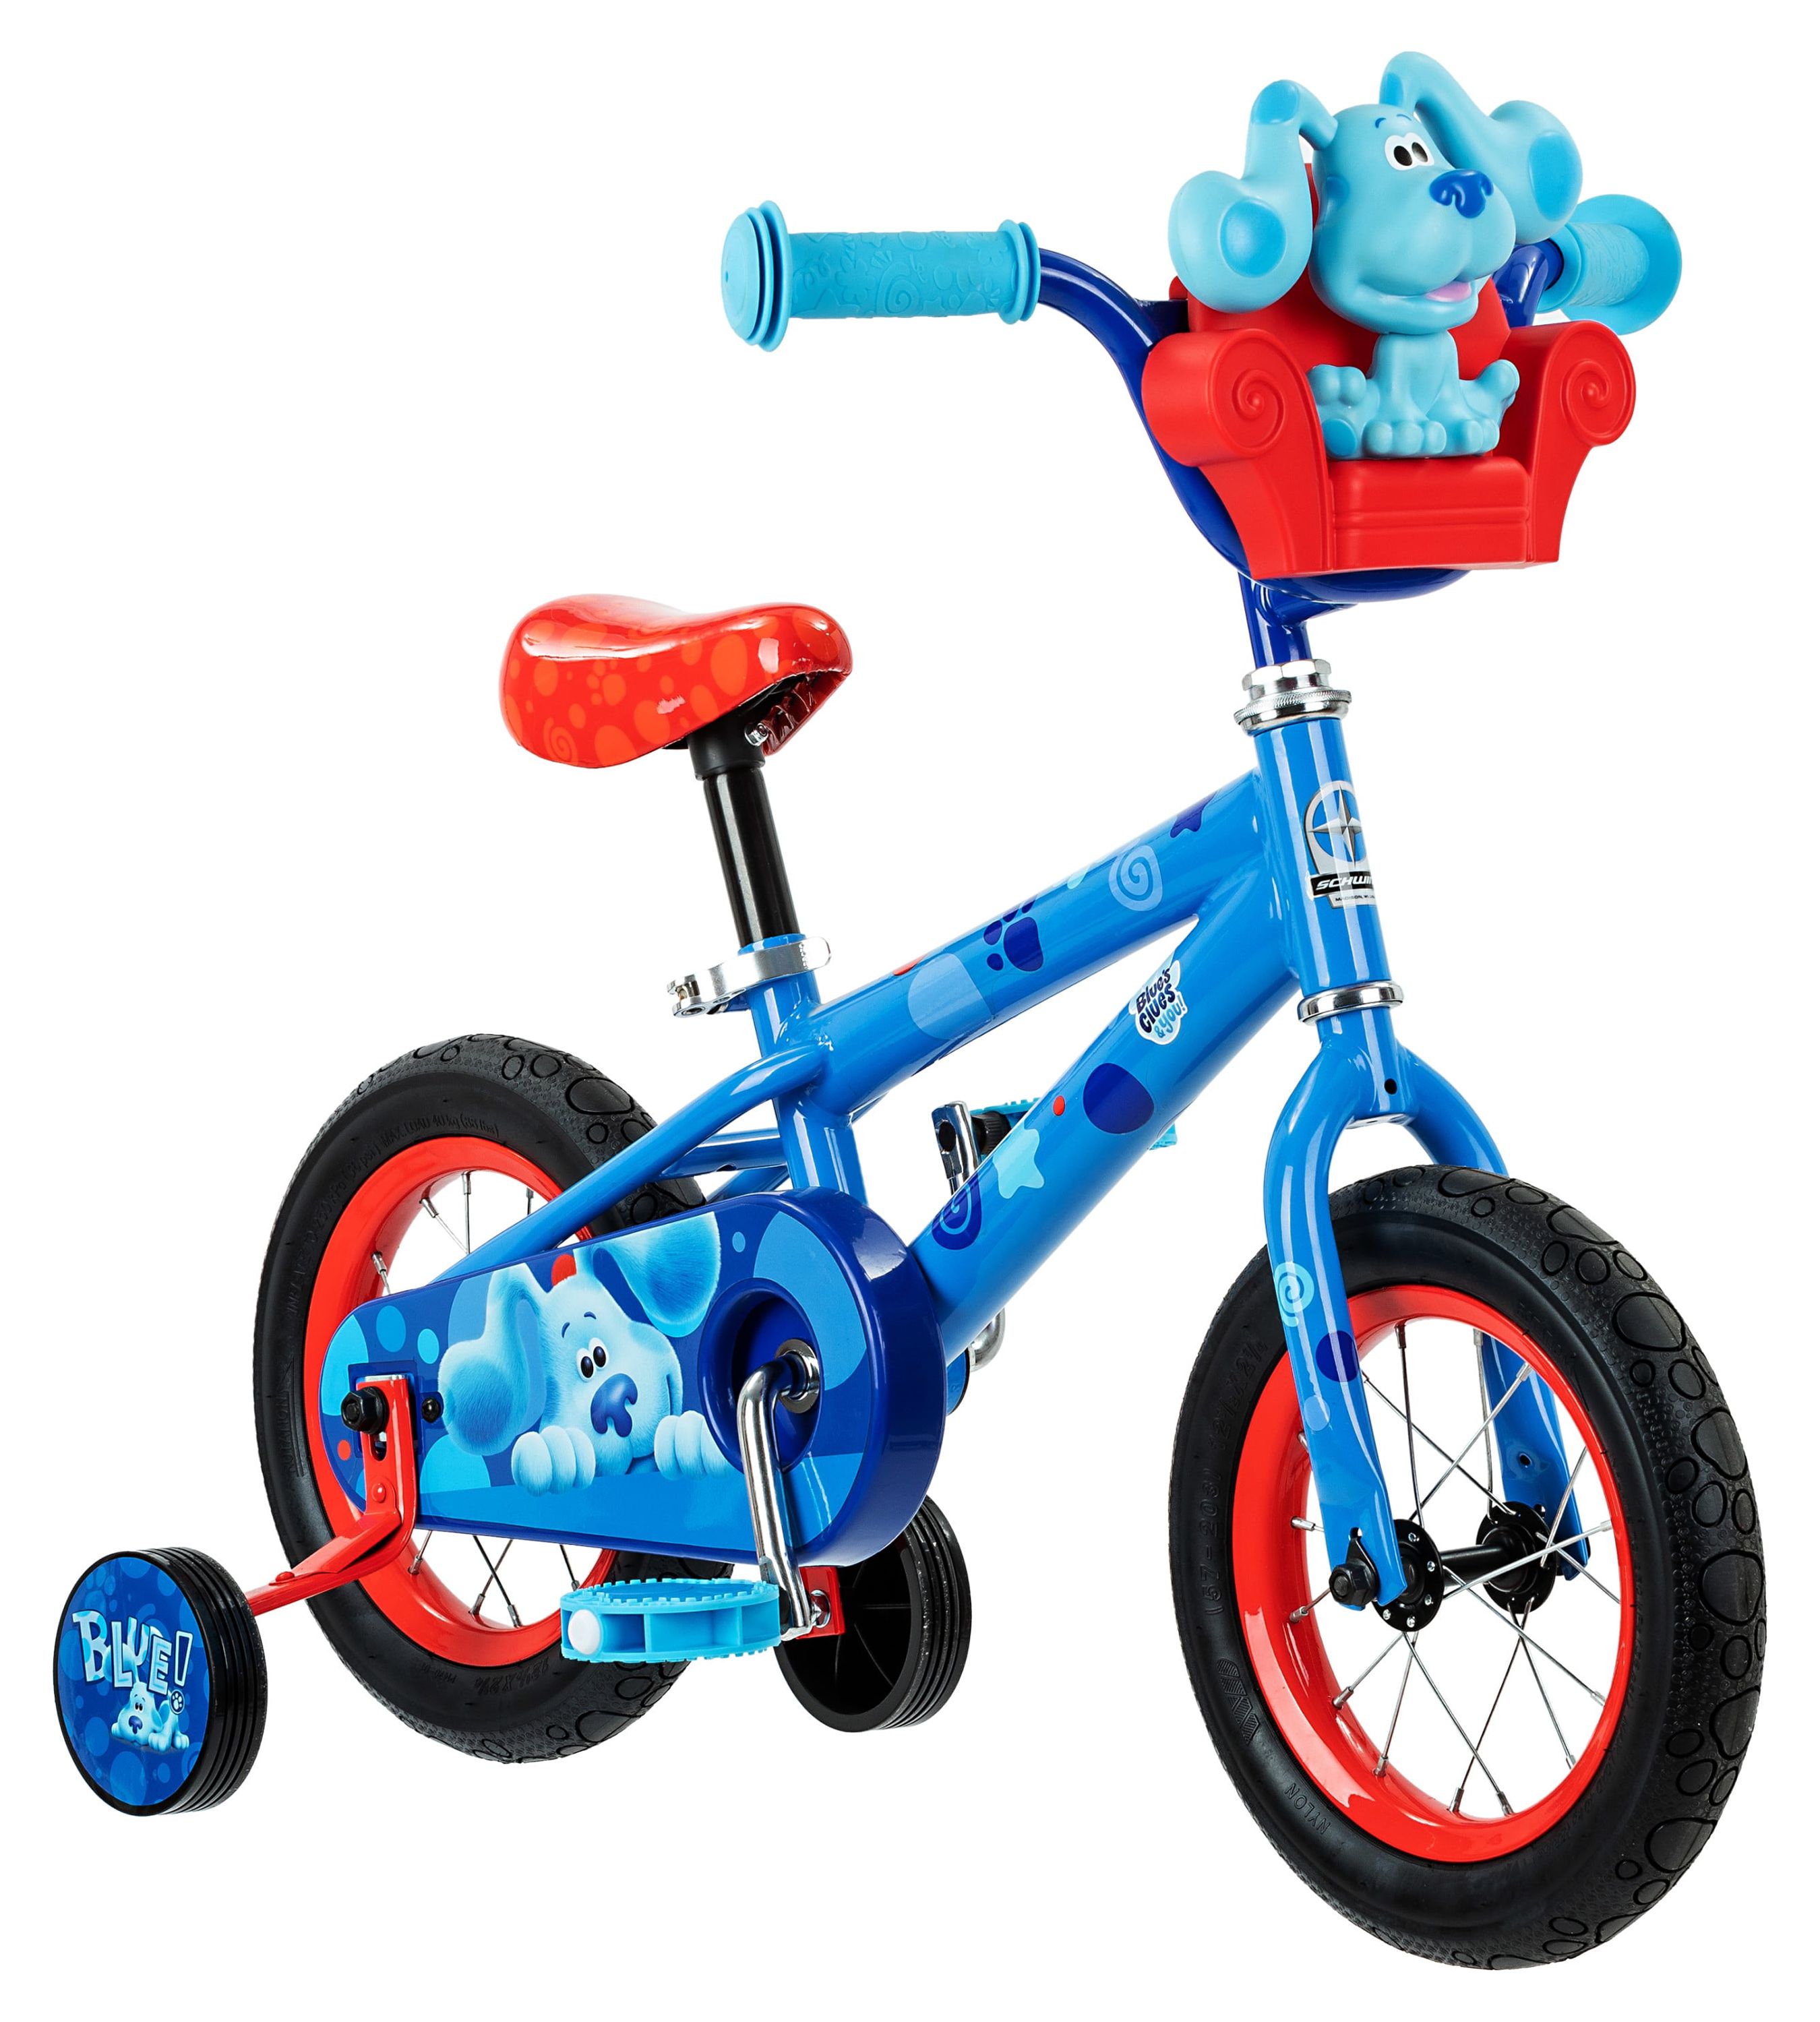 Nickelodeon Blue's Clues Kids Bike, 12 -Inch Wheel, Ages 2 to 4, Blue - image 1 of 9